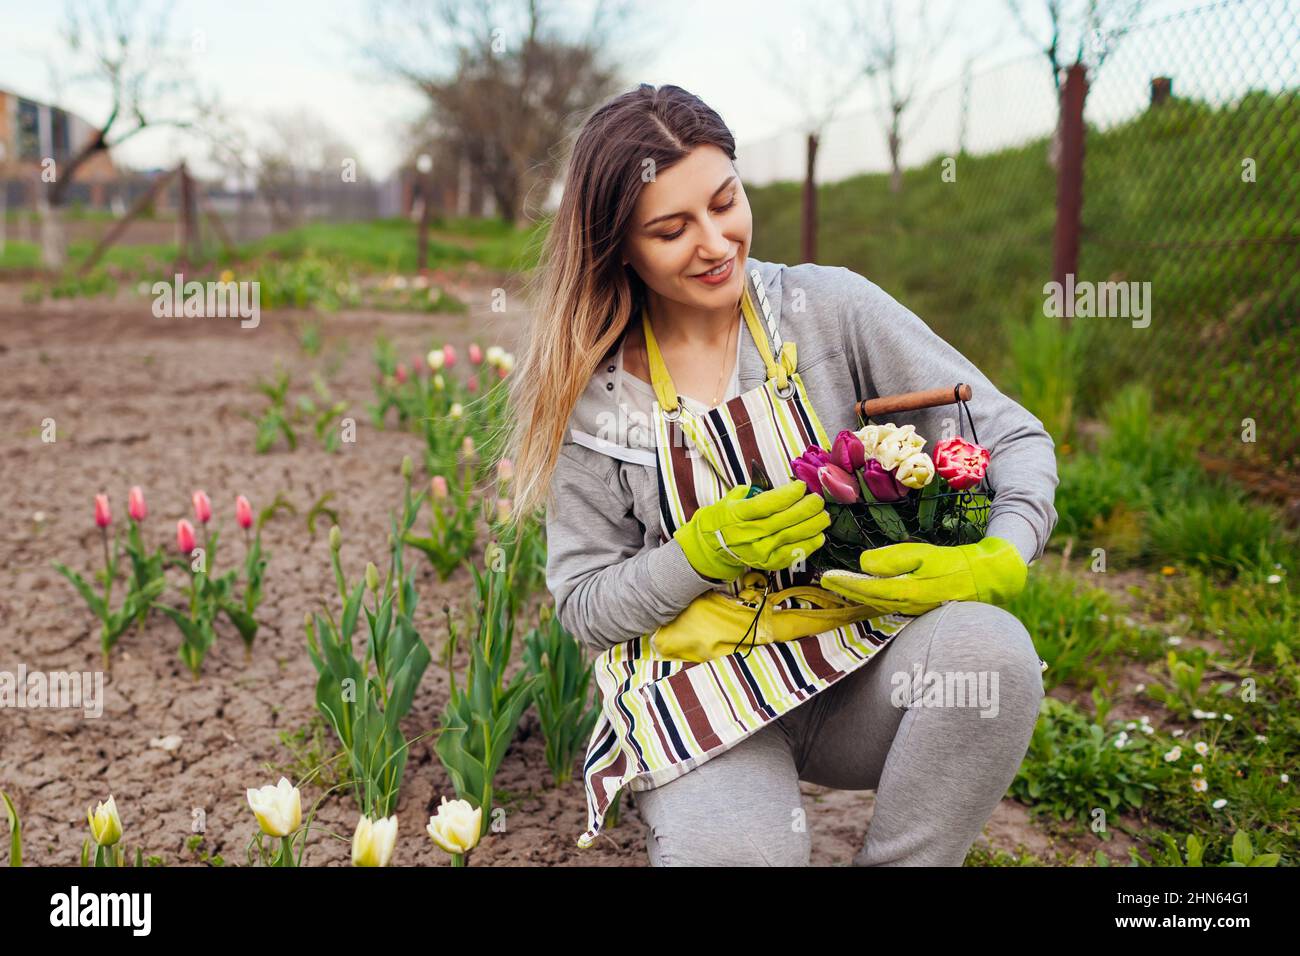 Fresh tulips gathered in metal basket in spring garden. Gardener woman holds purple, white, pink flowers and pruner wearing gloves and apron Stock Photo